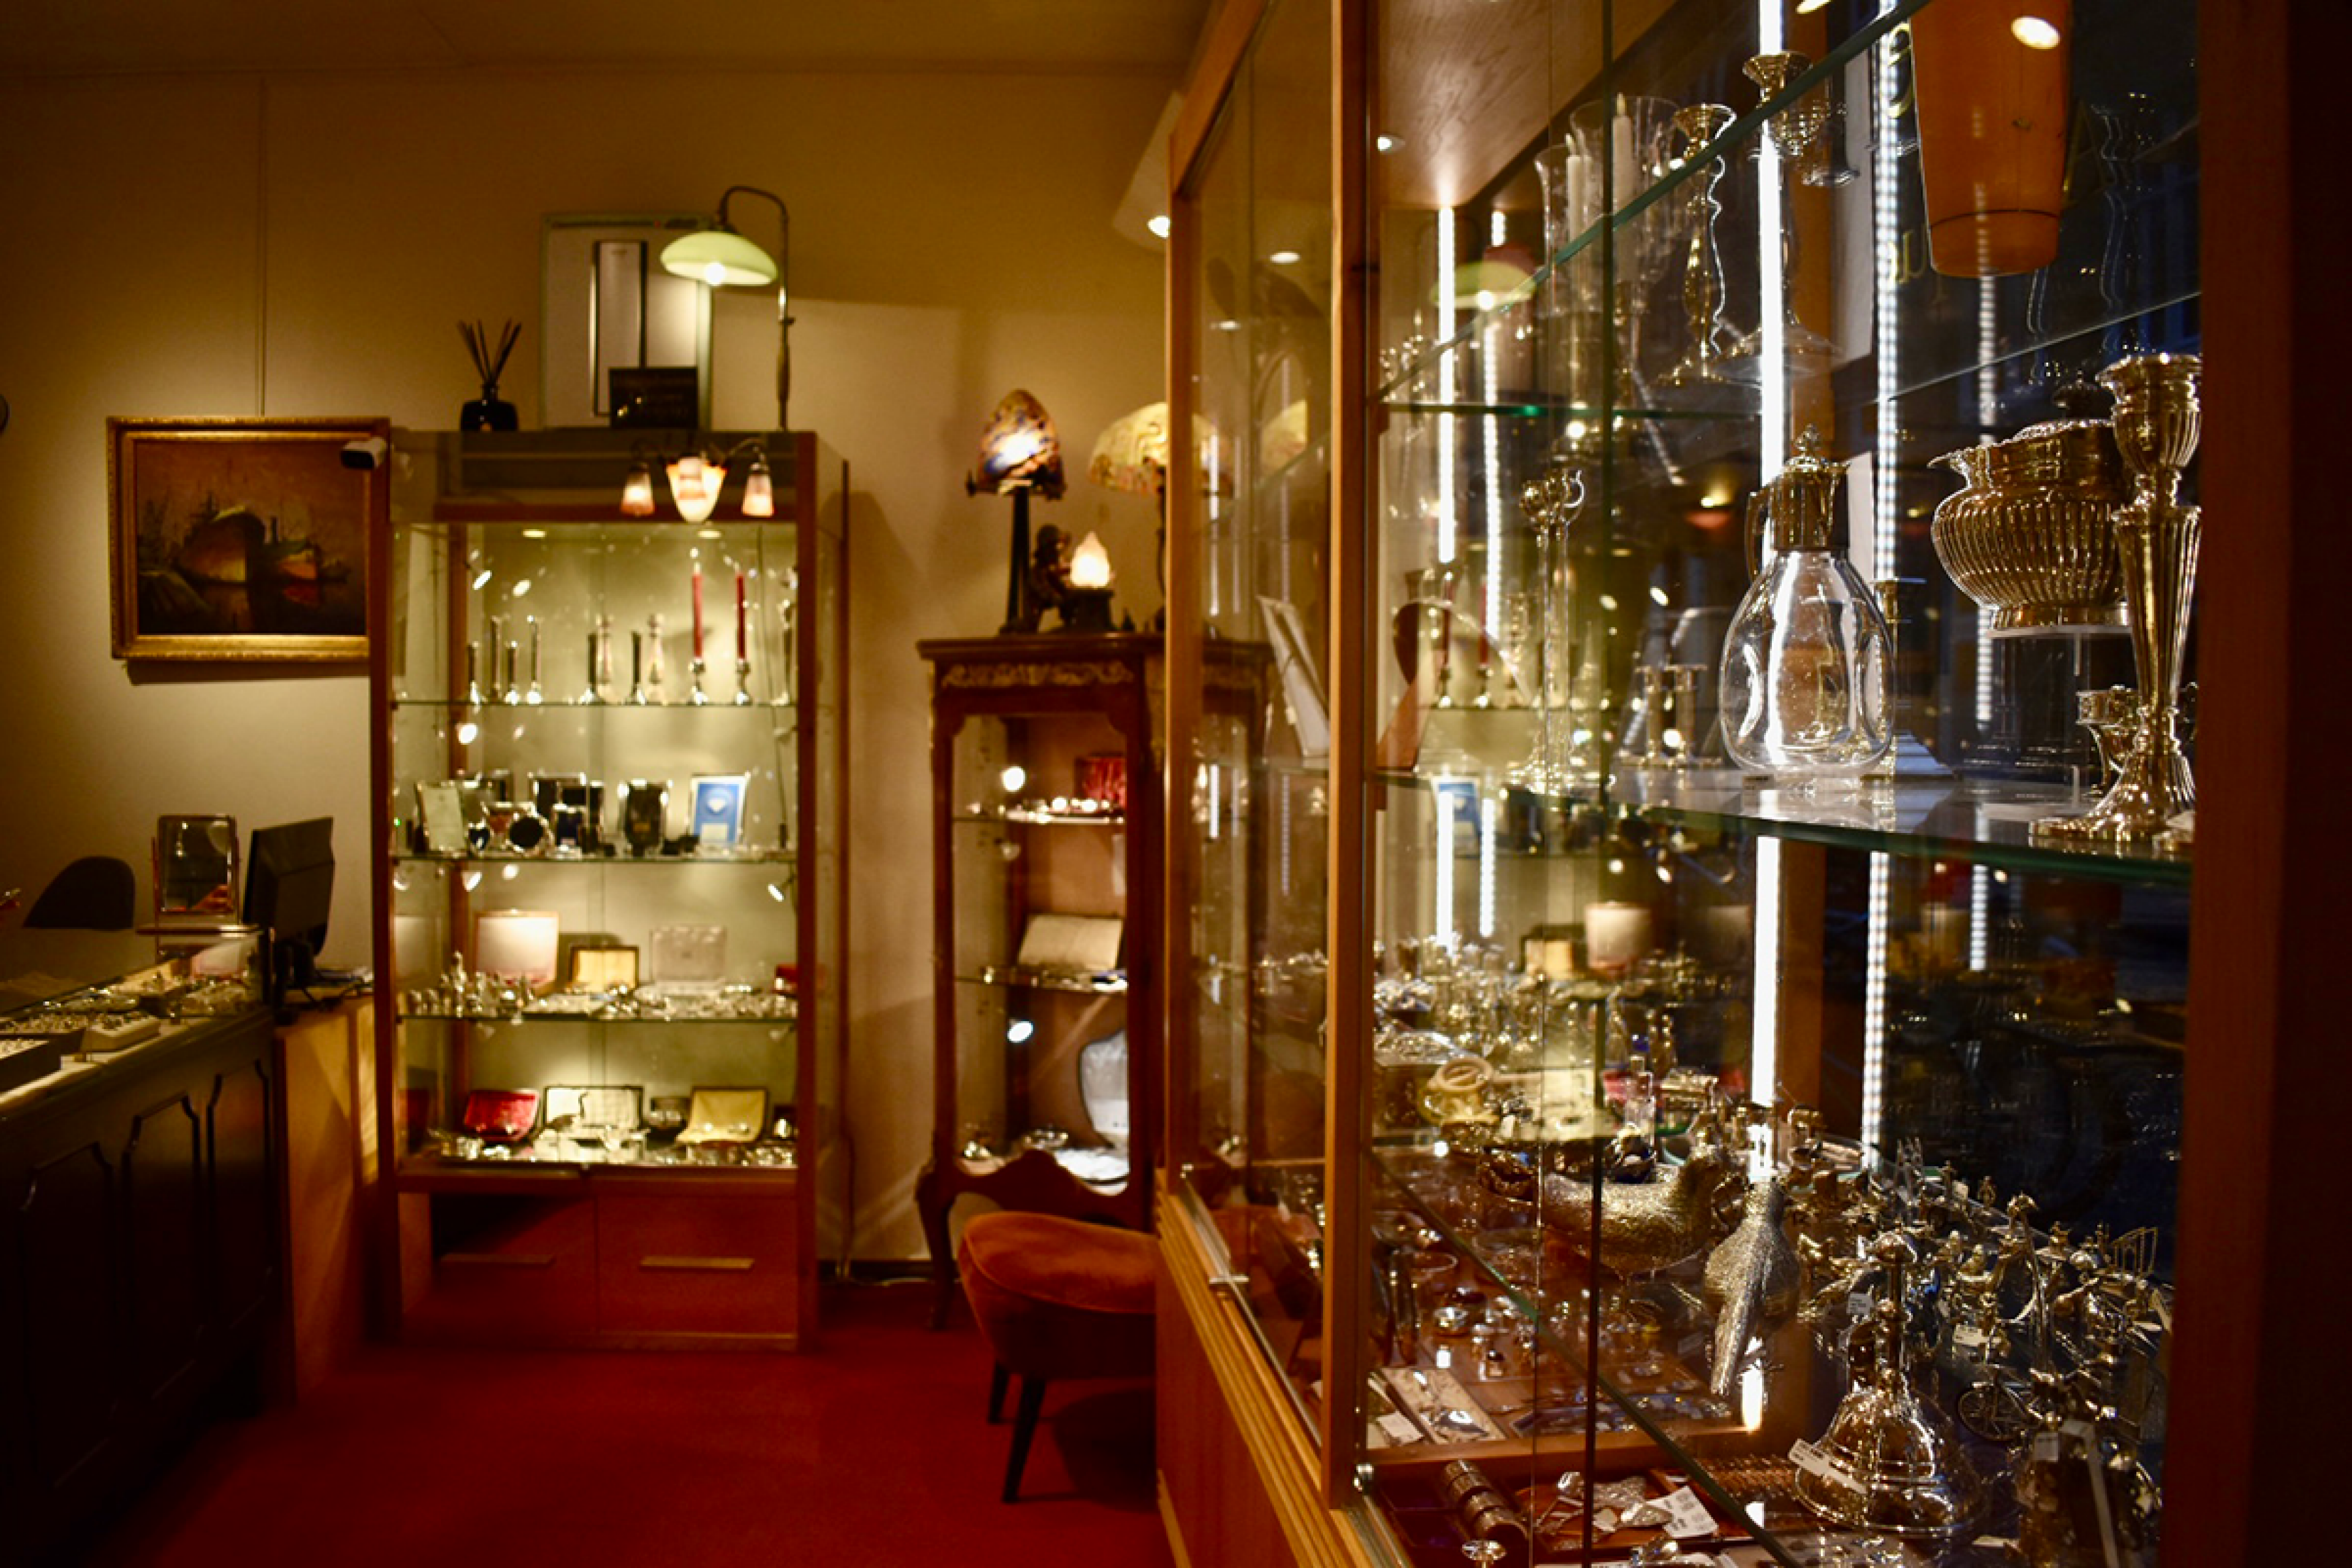 Interior of shop with cases full of crystal and other treasures